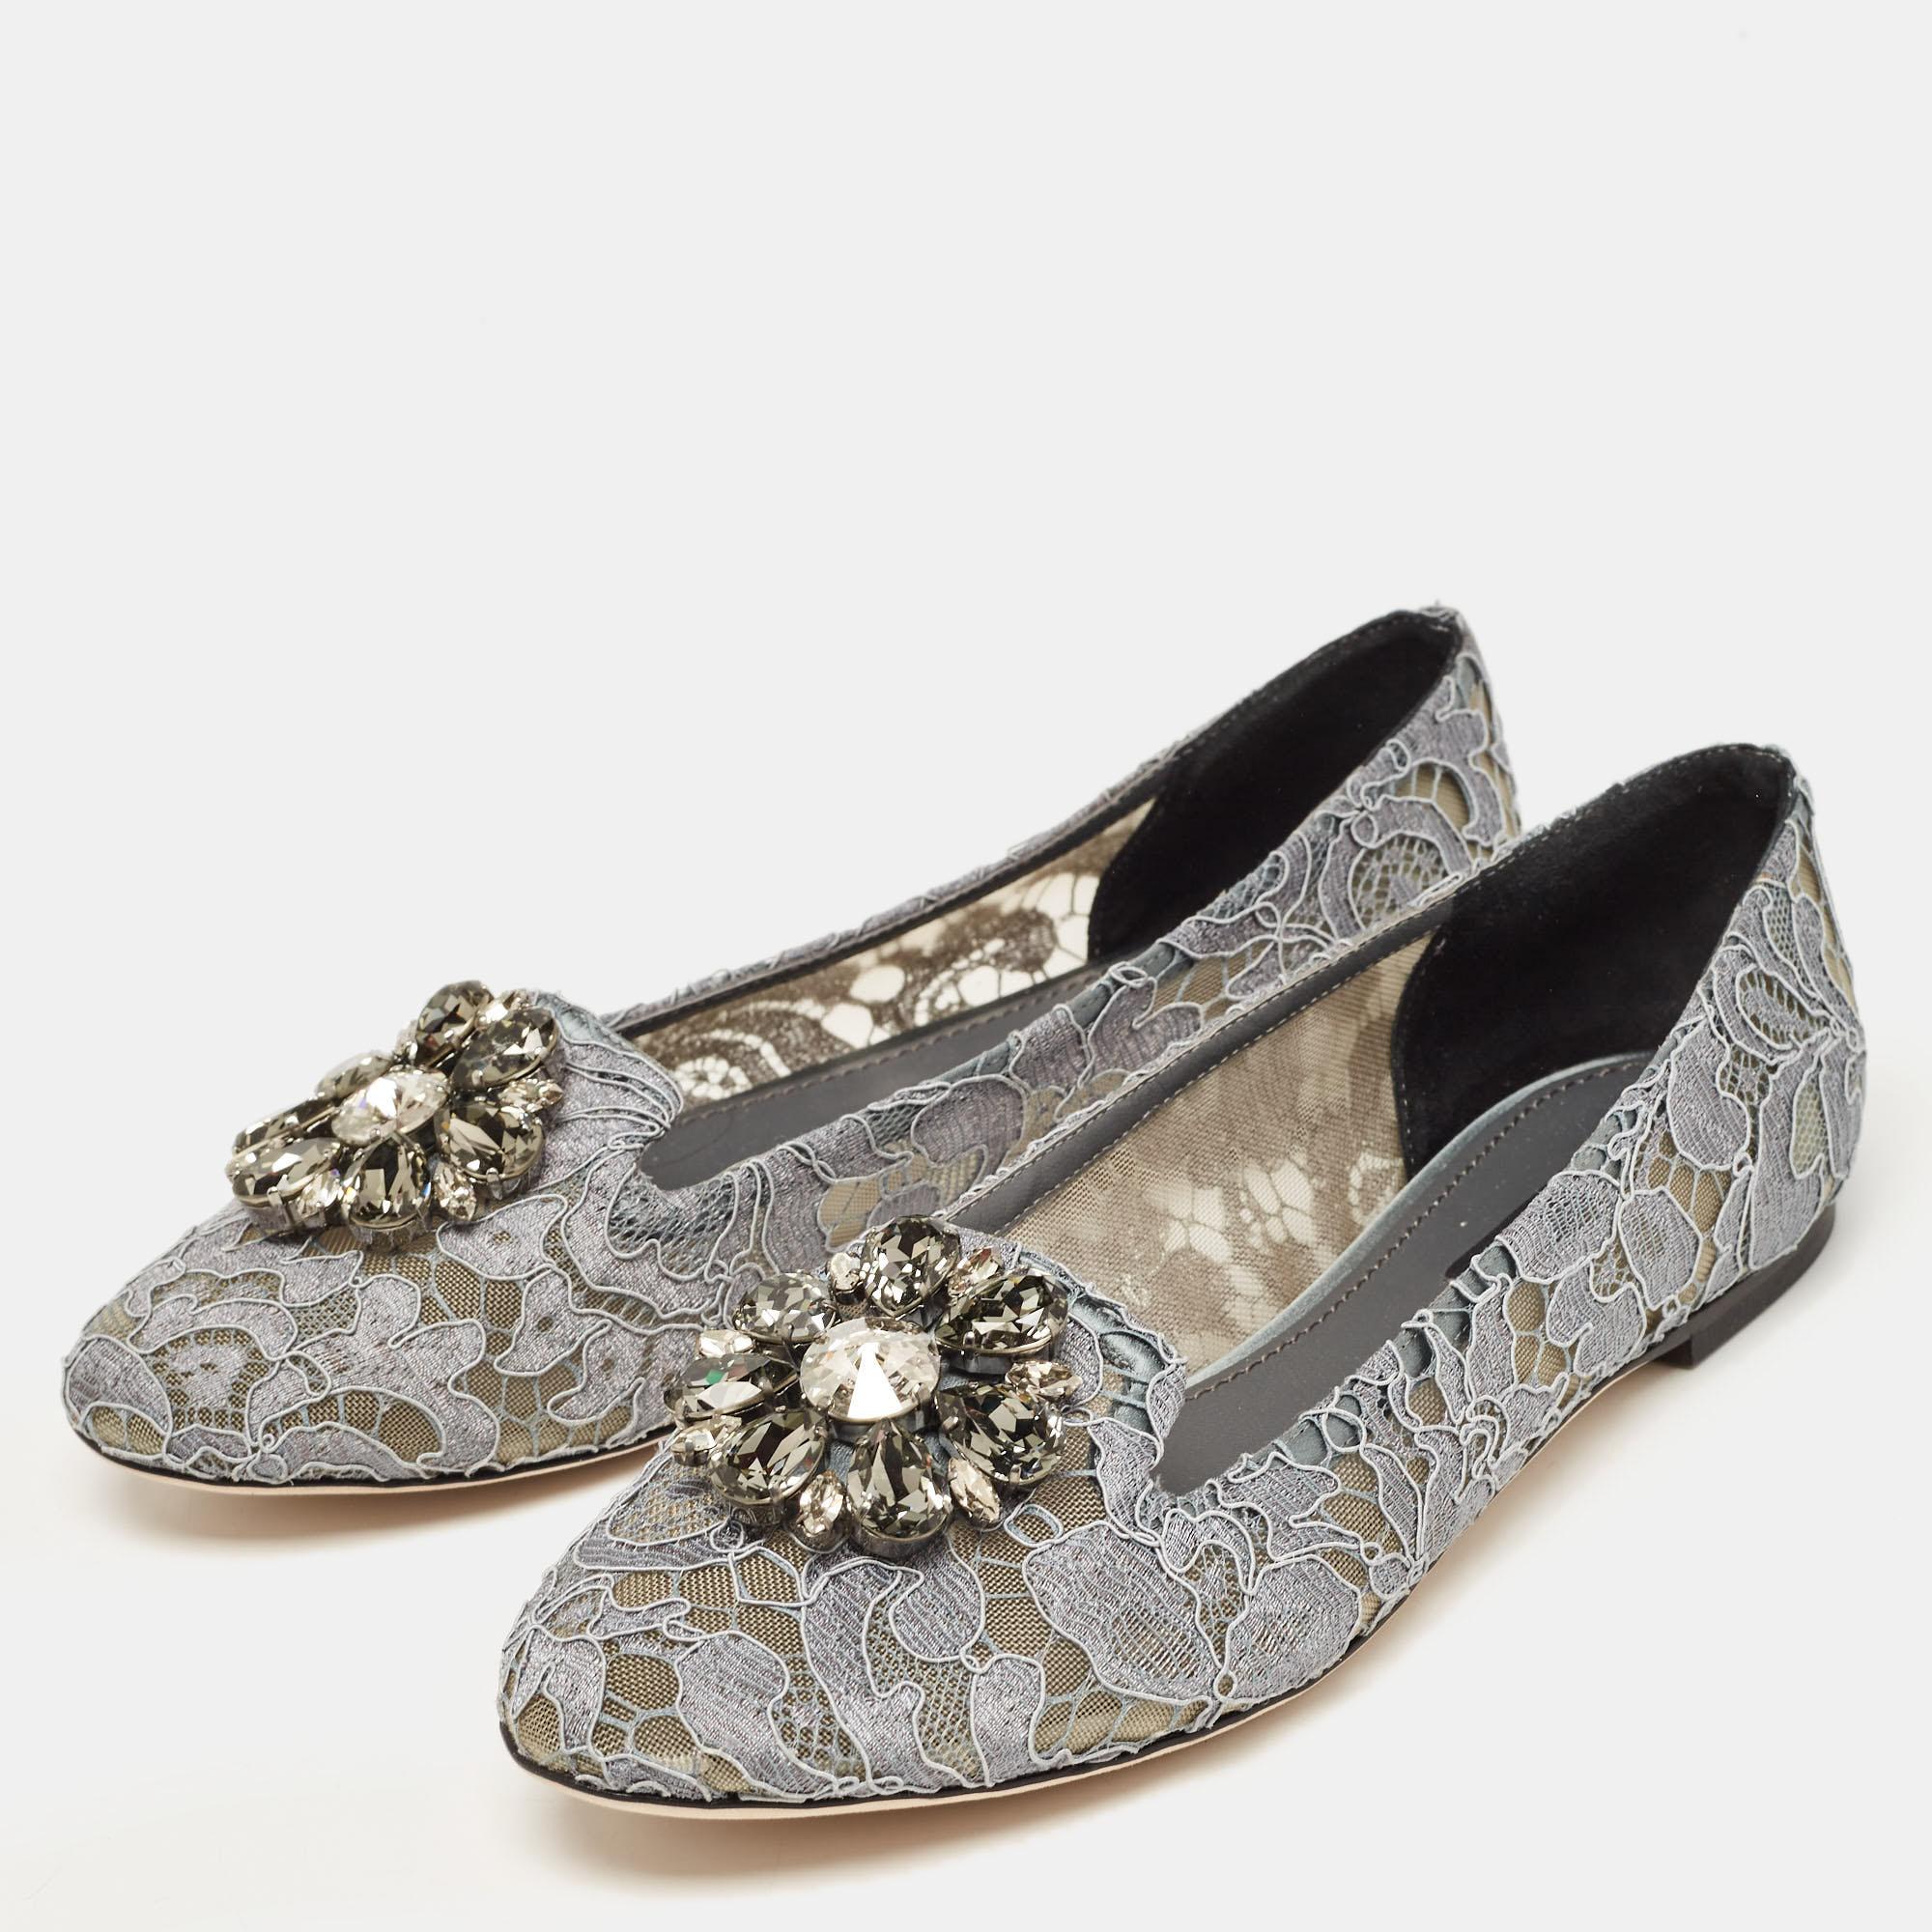 Dolce & Gabbana Grey Lace and Mesh Bellucci Crystal Embellished Ballet Flats Siz In Excellent Condition For Sale In Dubai, Al Qouz 2